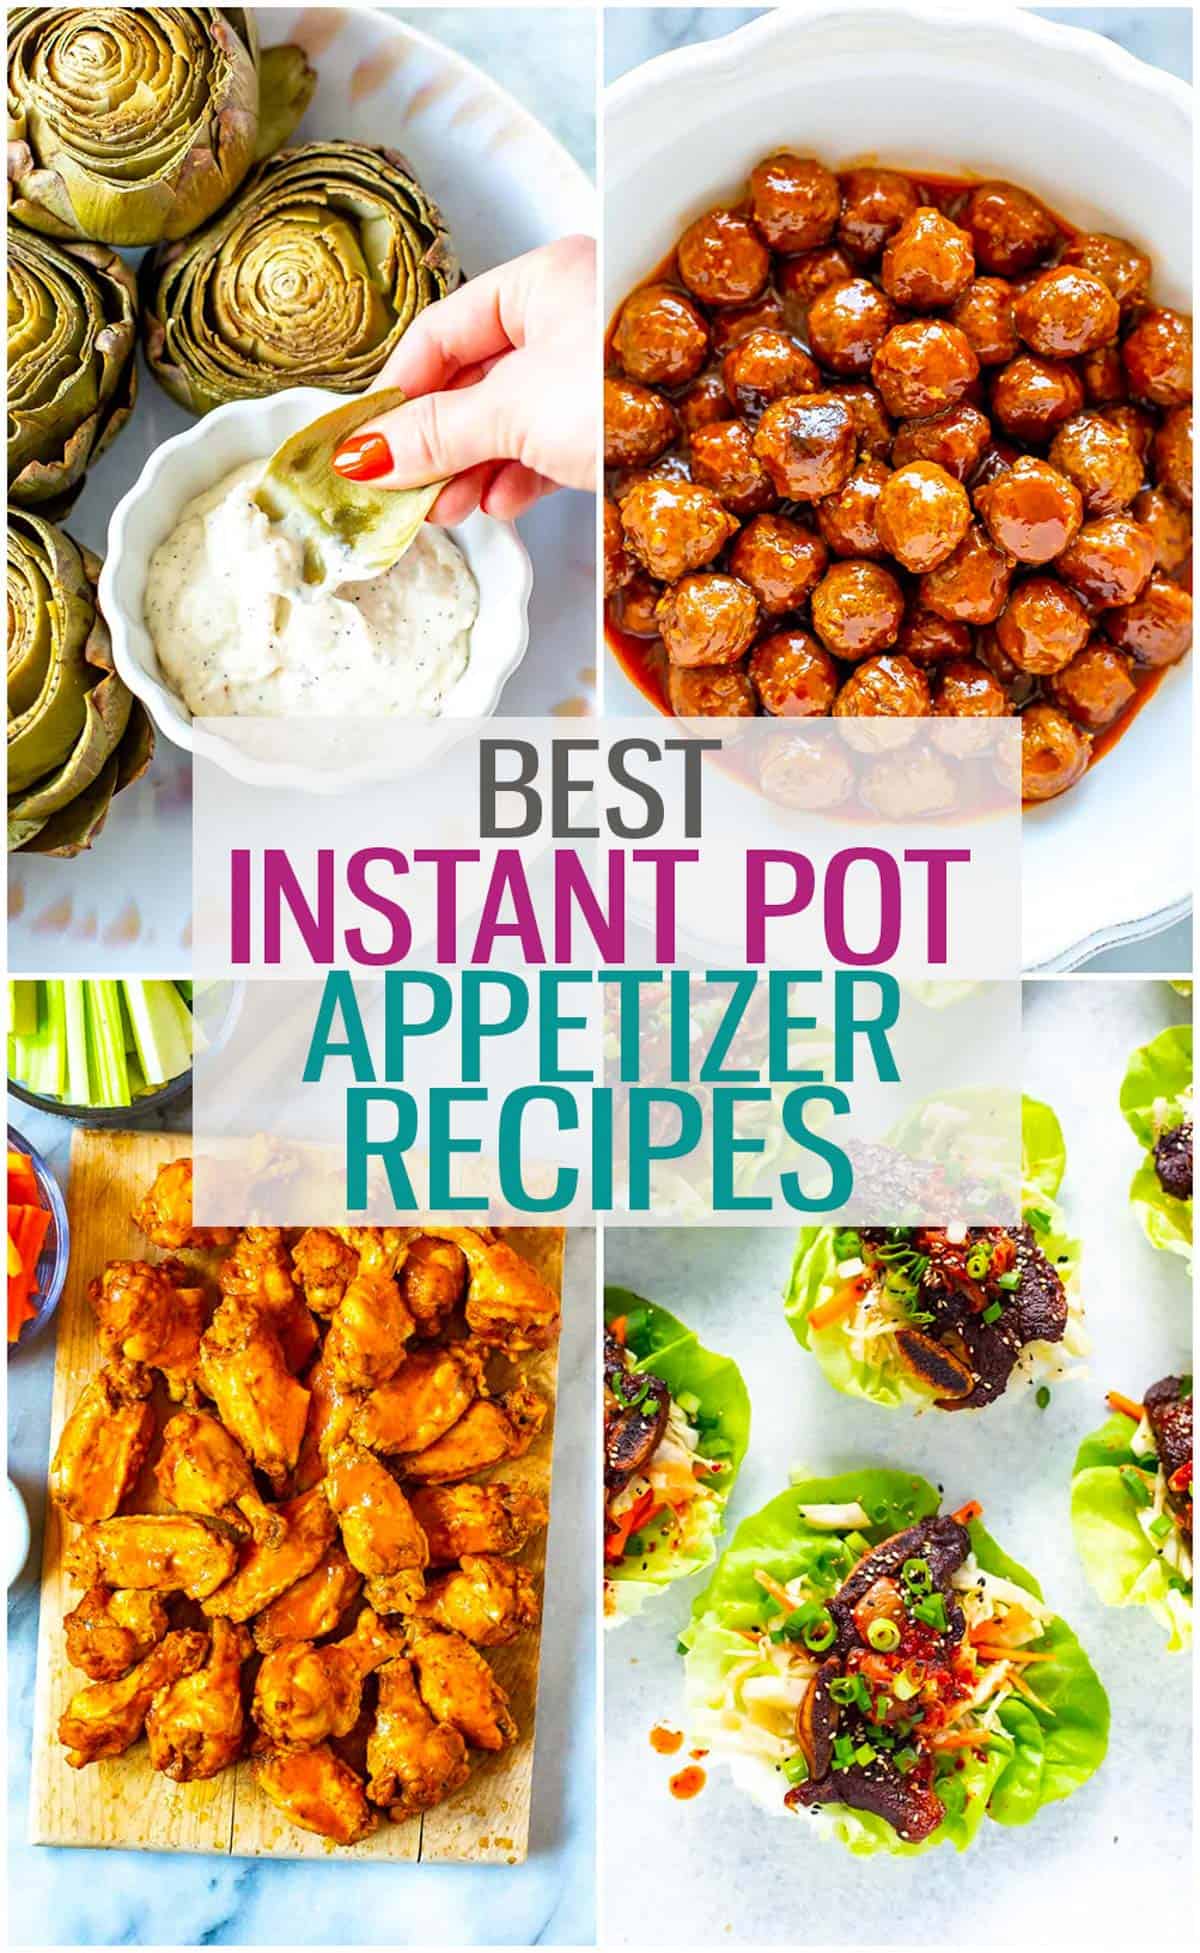 A collage of 4 different Instant Pot appetizers with the text "Best Instant Pot Appetizer Recipes" layered over top.